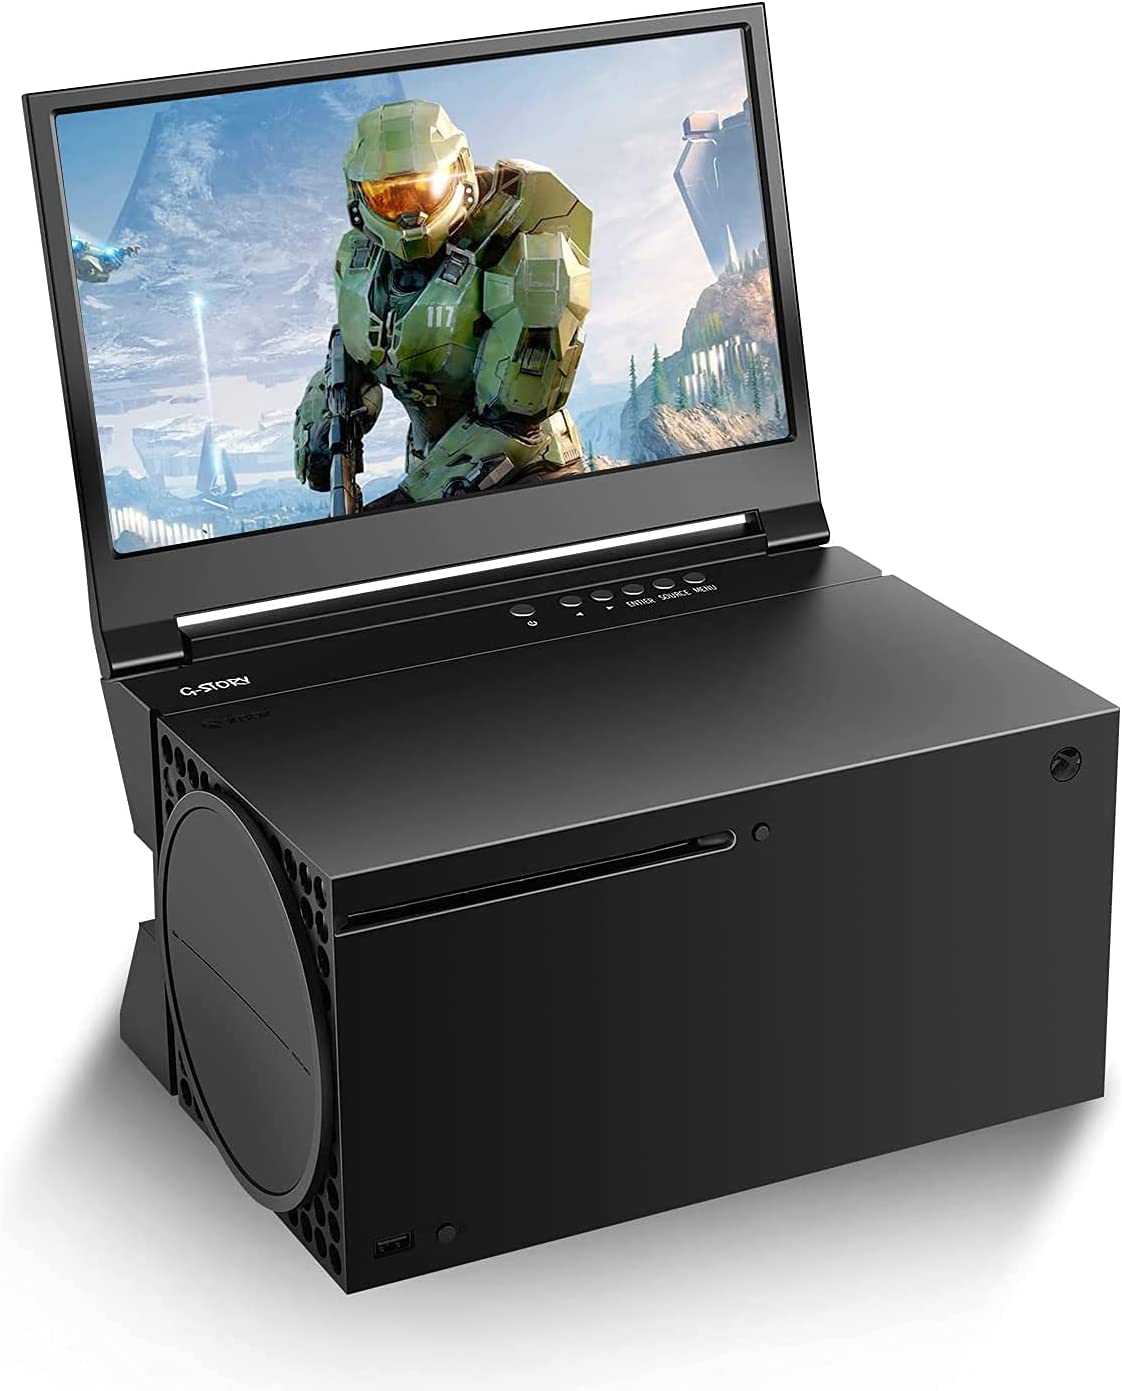 Copy of G-STORY 12.5‘’ Portable Monitor for Xbox Series X, UHD 1080p Portable Gaming Monitor